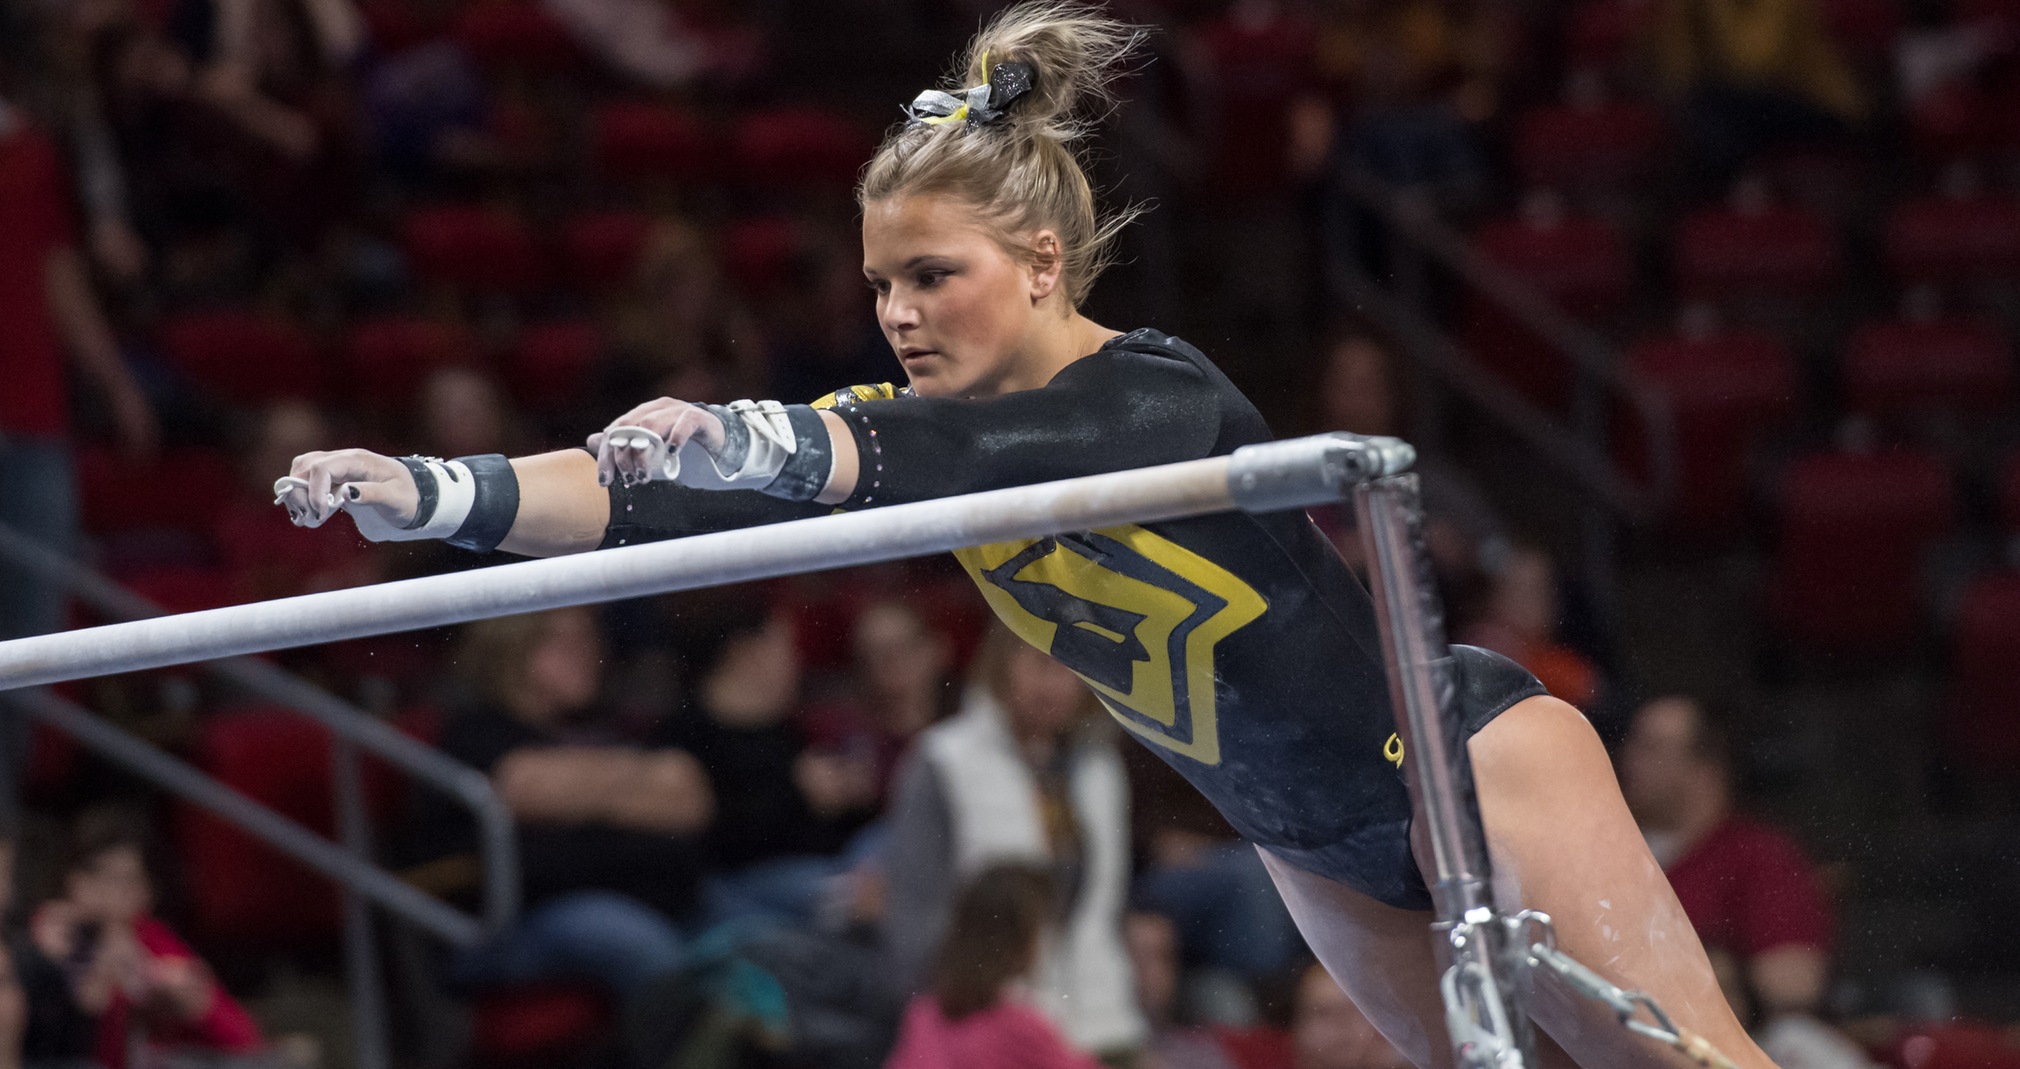 Madison Reiter recorded a score of 8.50 on the uneven bars at the Iowa State University Triangular.